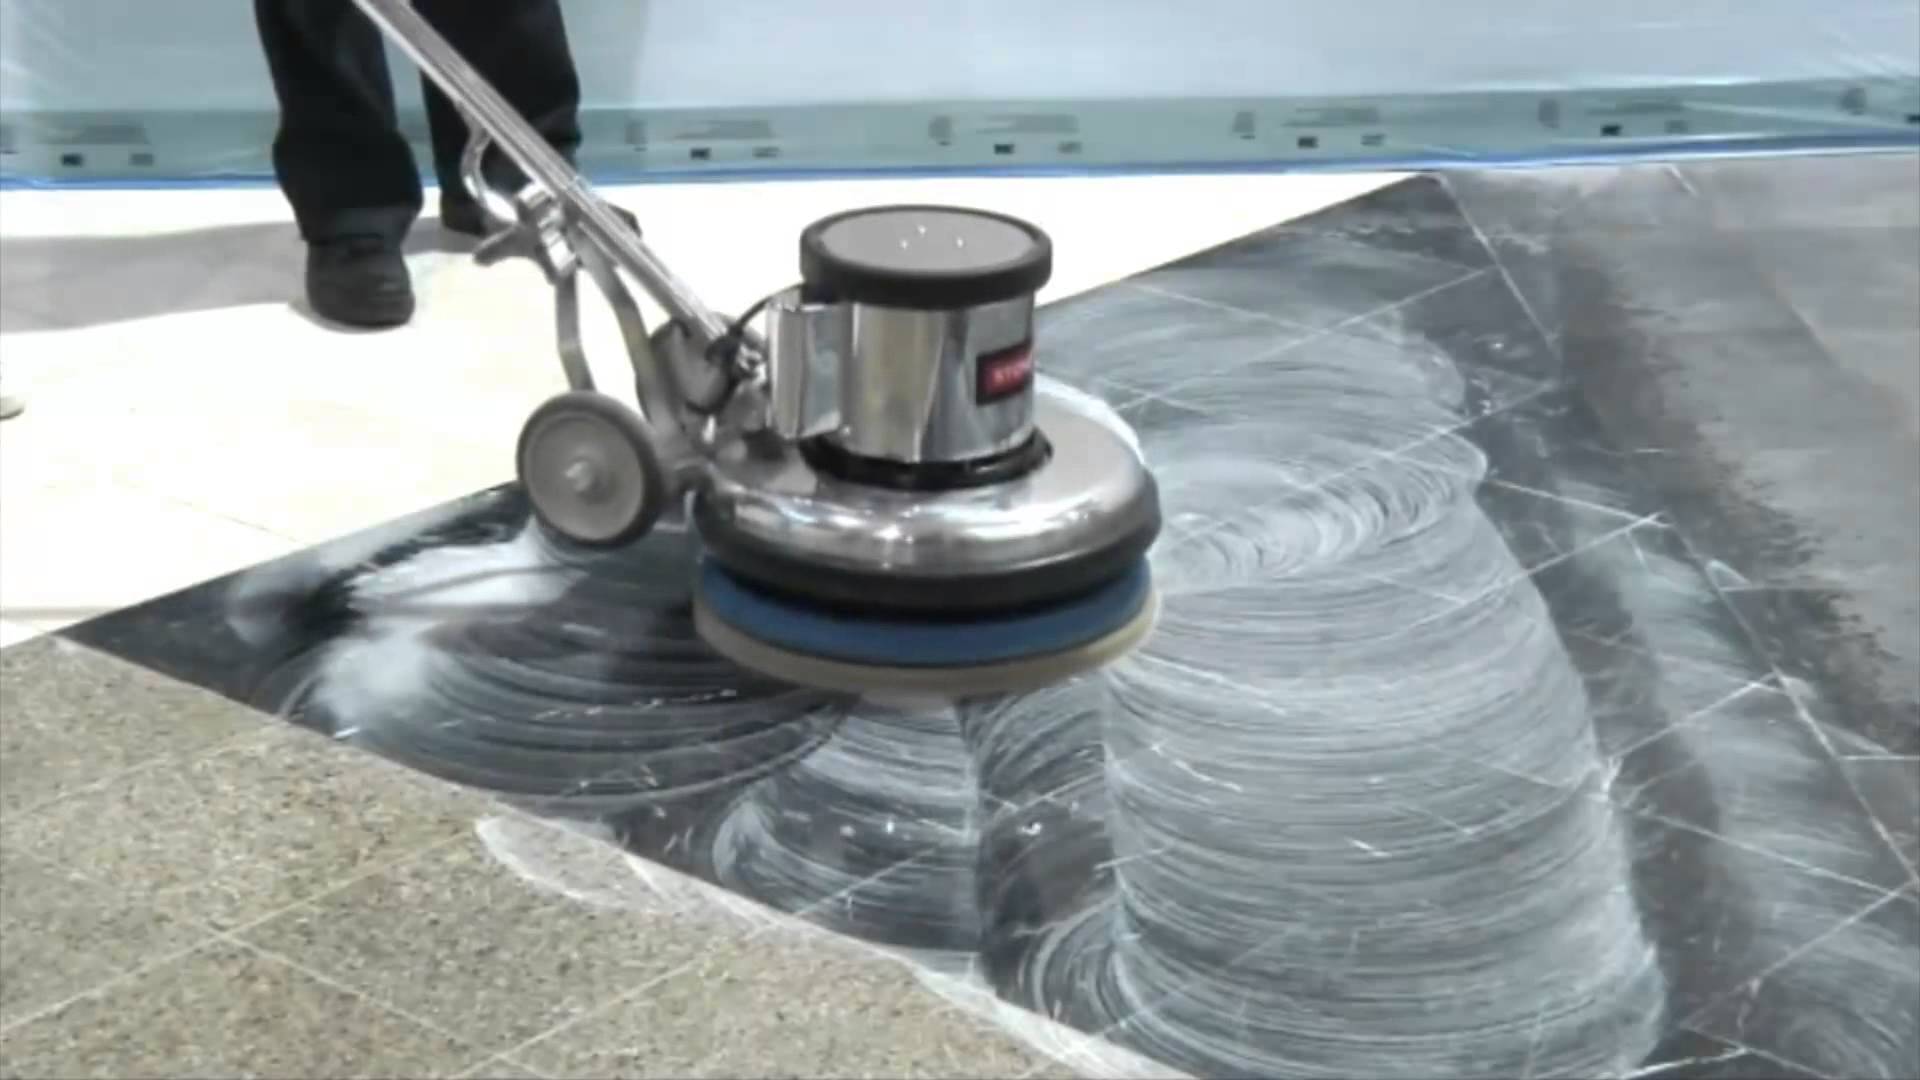 Prevent Unwanted Accidents With Non-Slip Tile Treatment